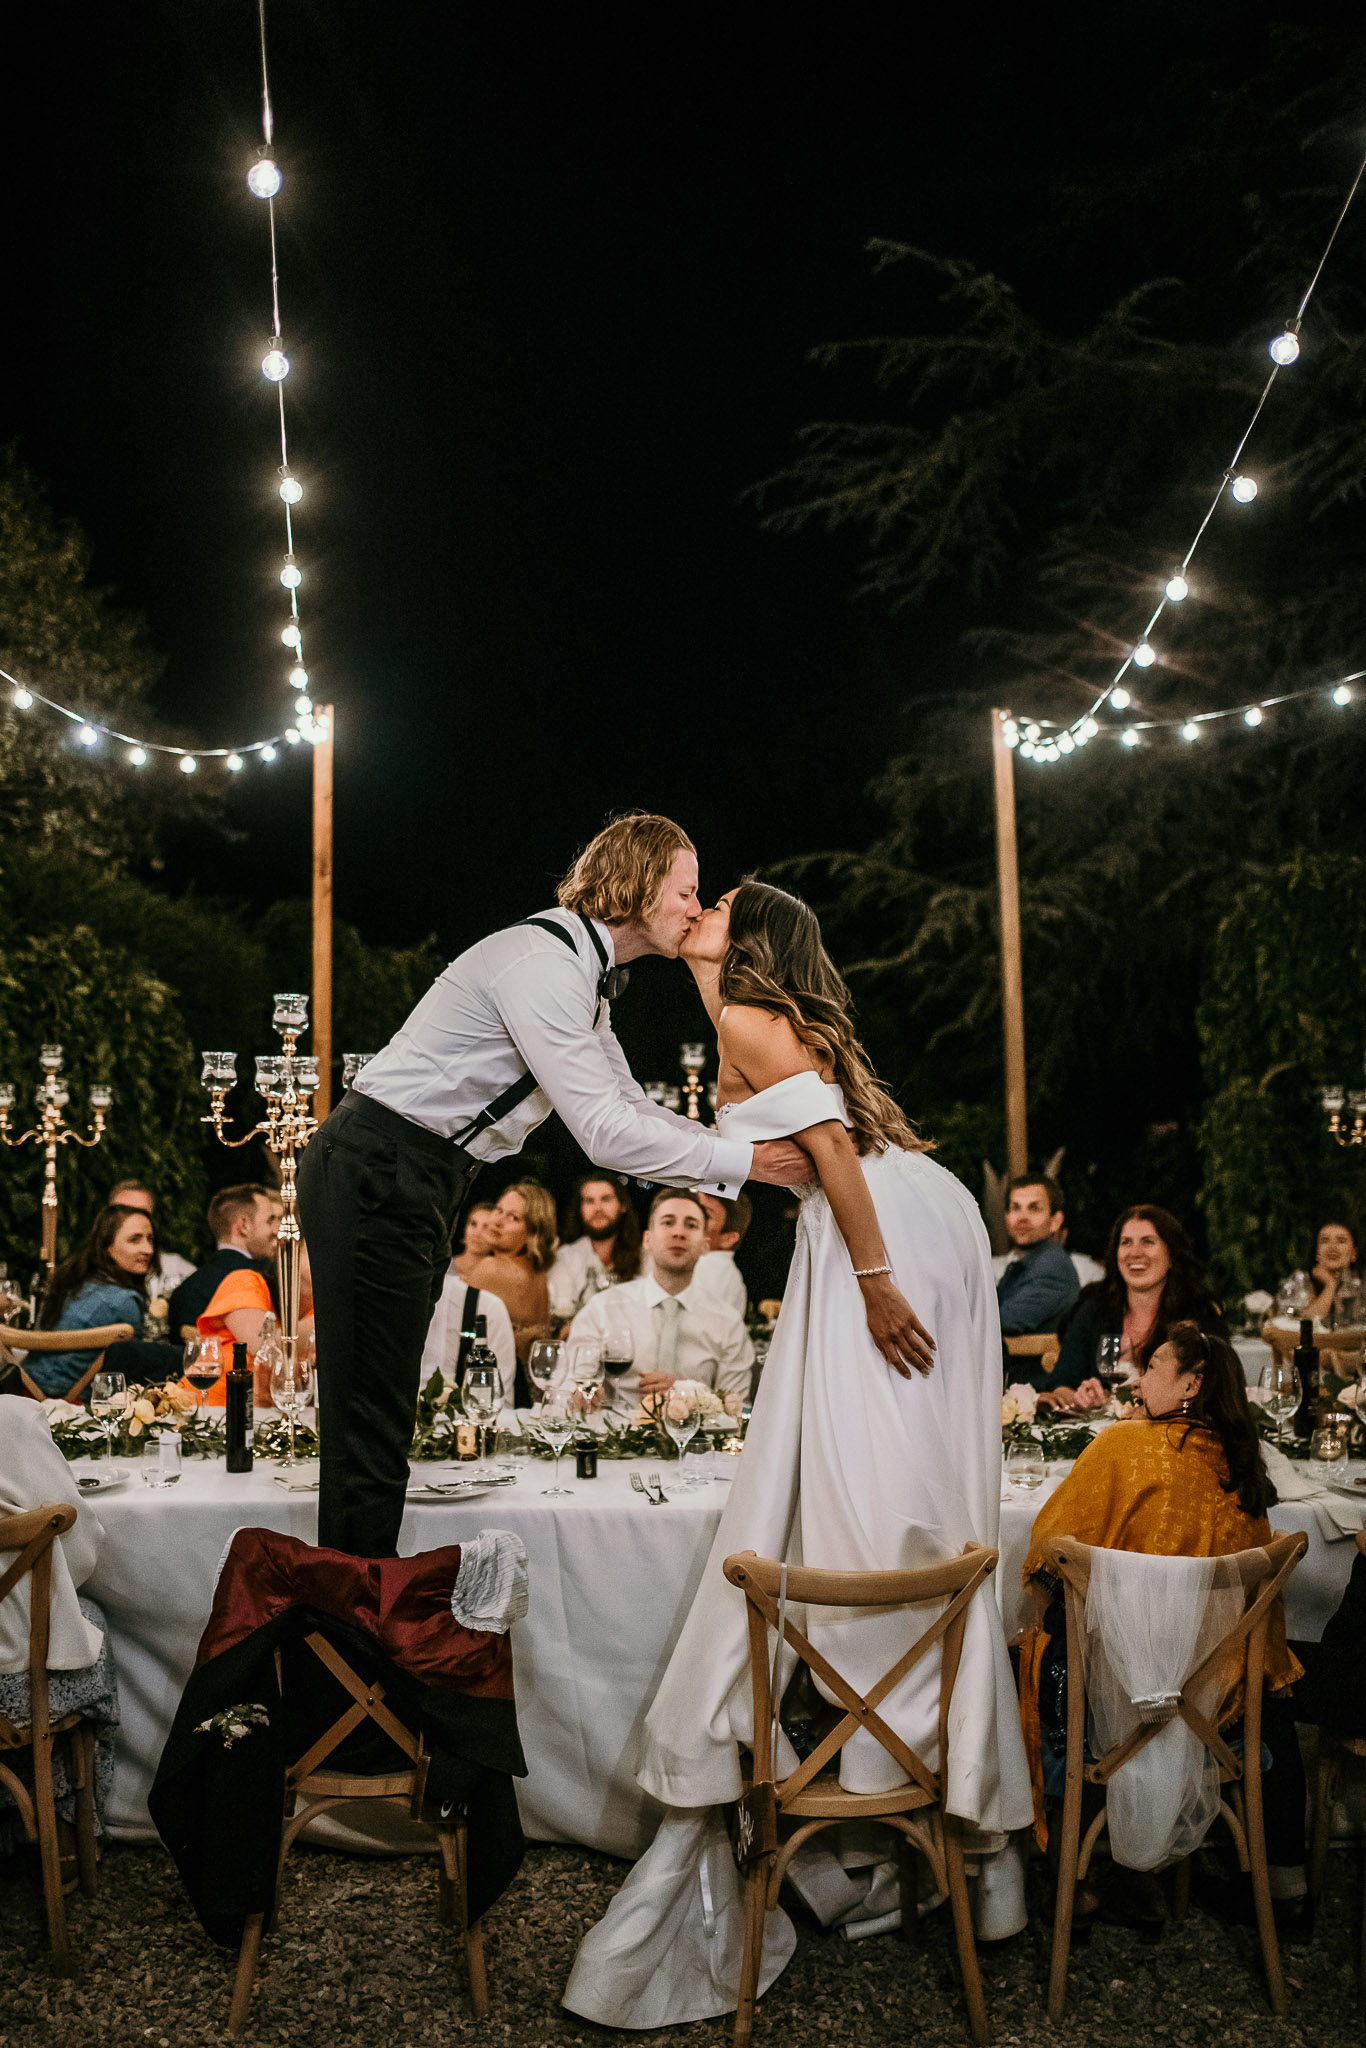 Bride and groom kissing, photographed by their wedding photographer during a romantic wedding dinner in ITaly